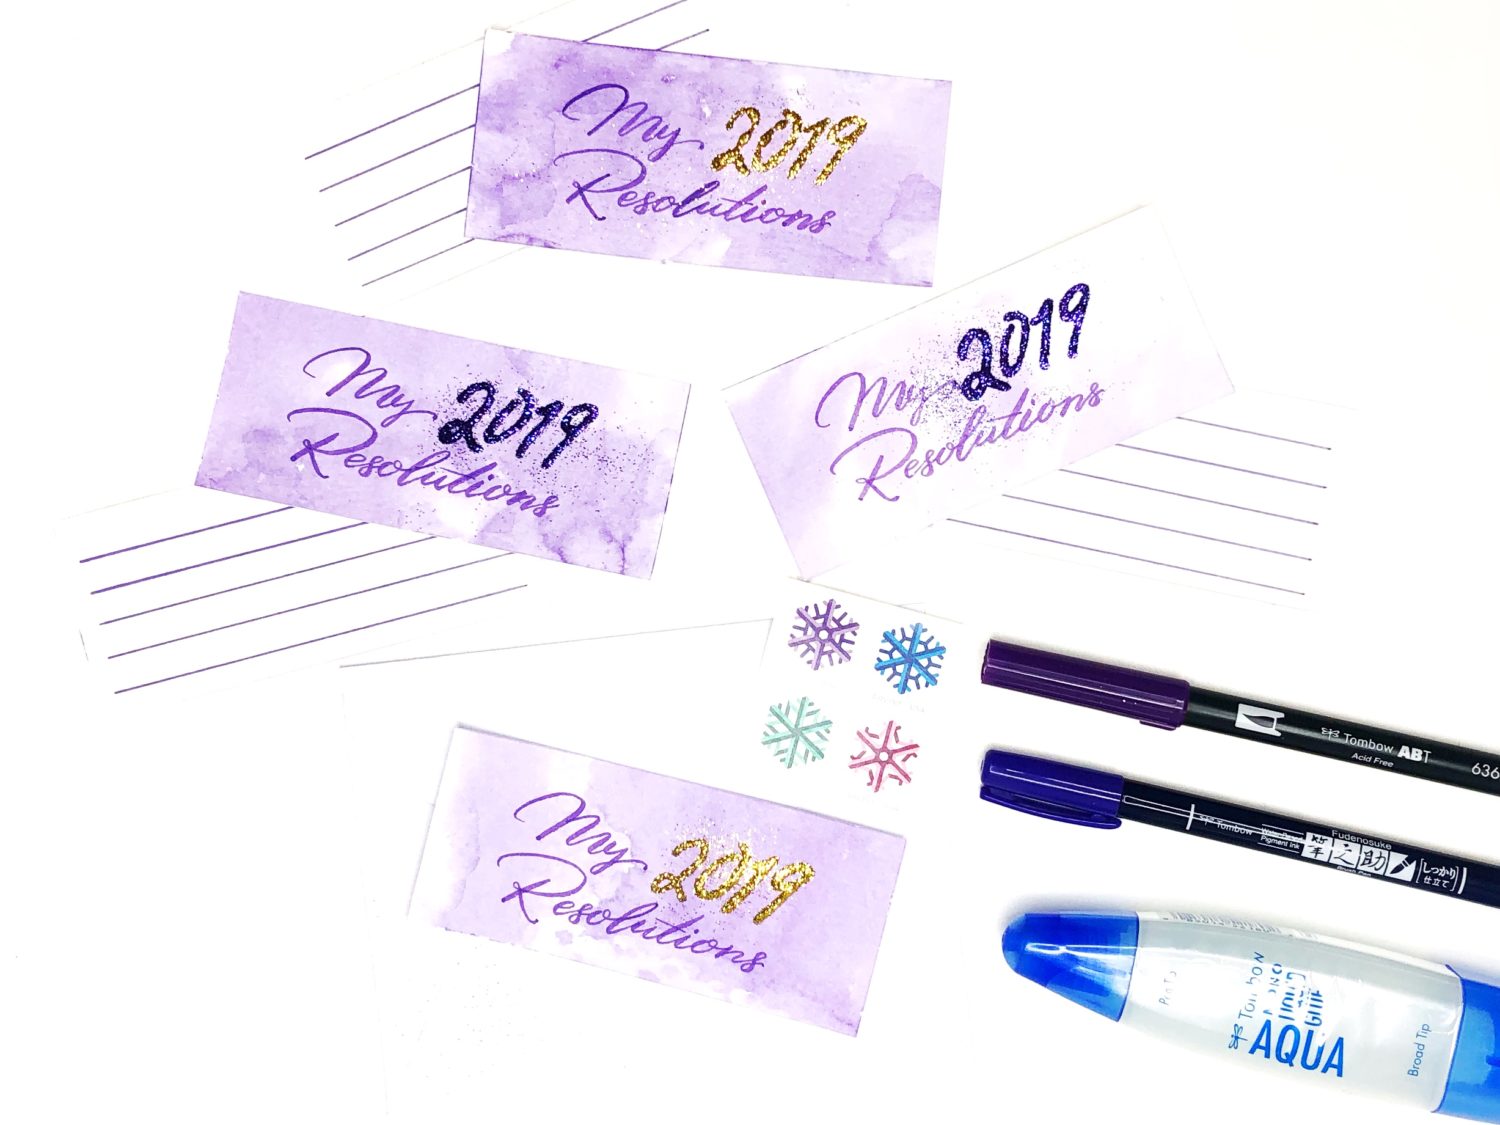 New Year's Resolution Cards by Jessica Mack on behalf of Tombow